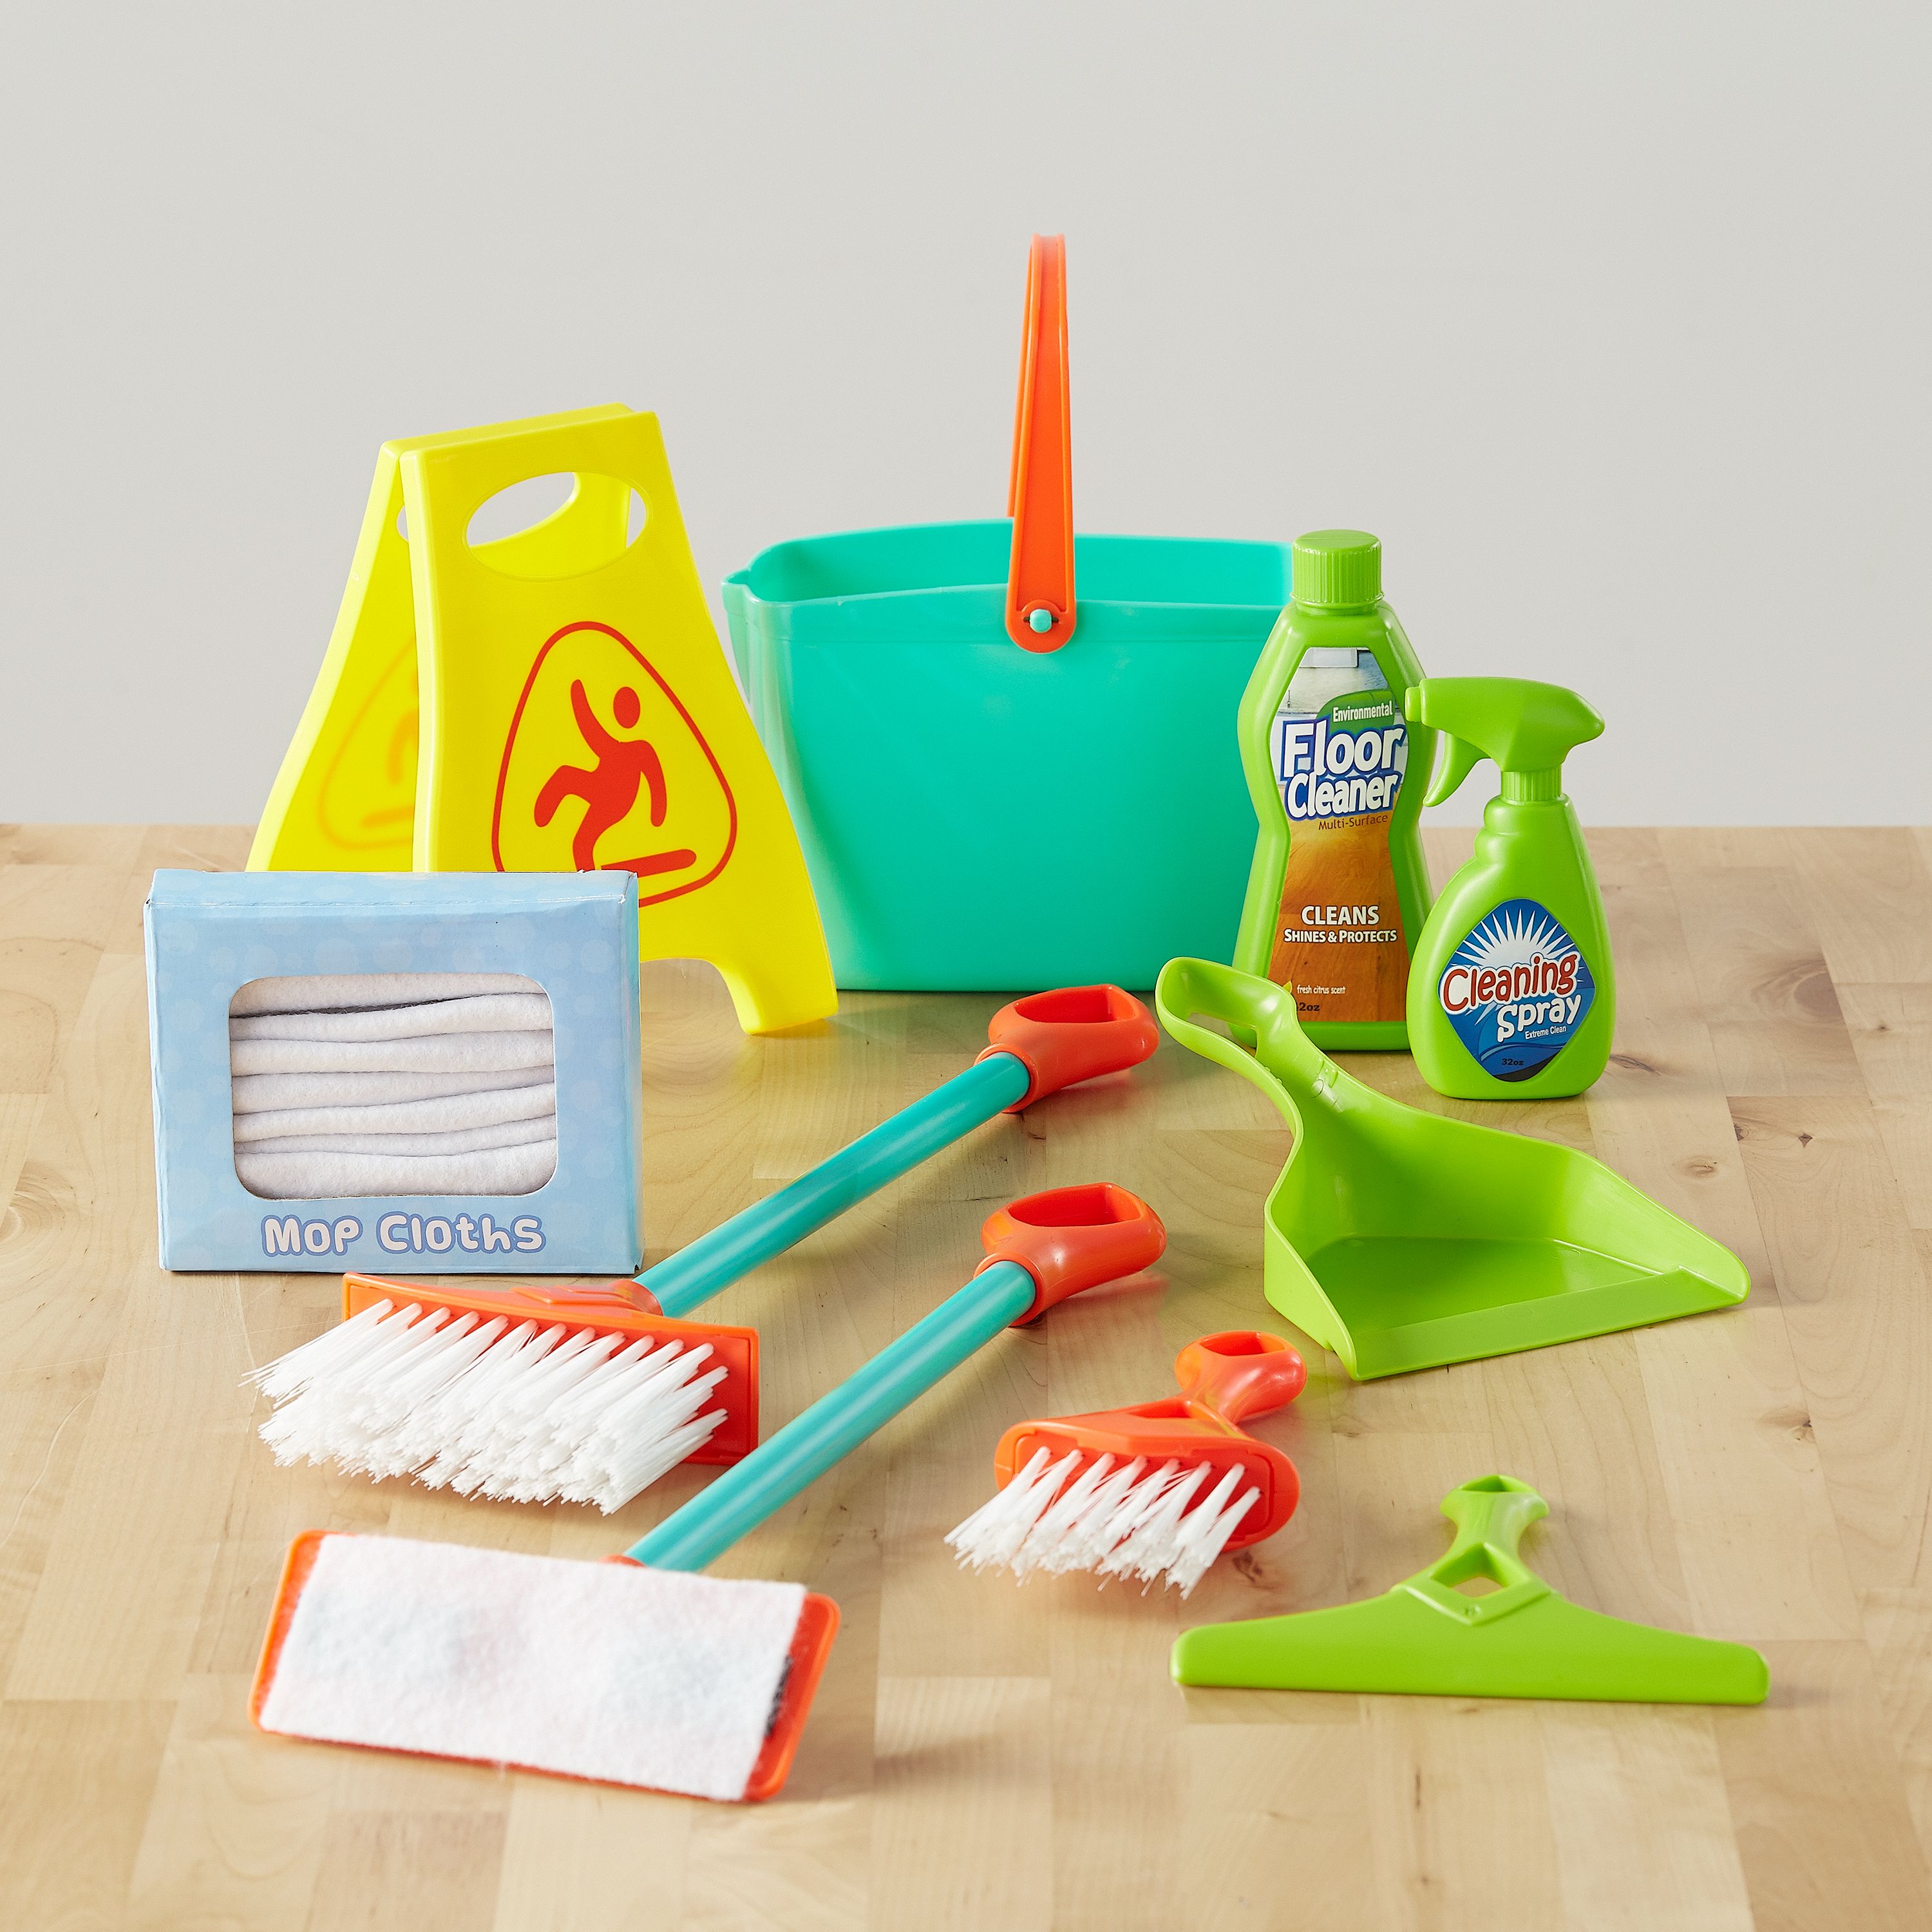 Spark. Create. Imagine. 20-Piece Cleaning Play Set - image 2 of 4